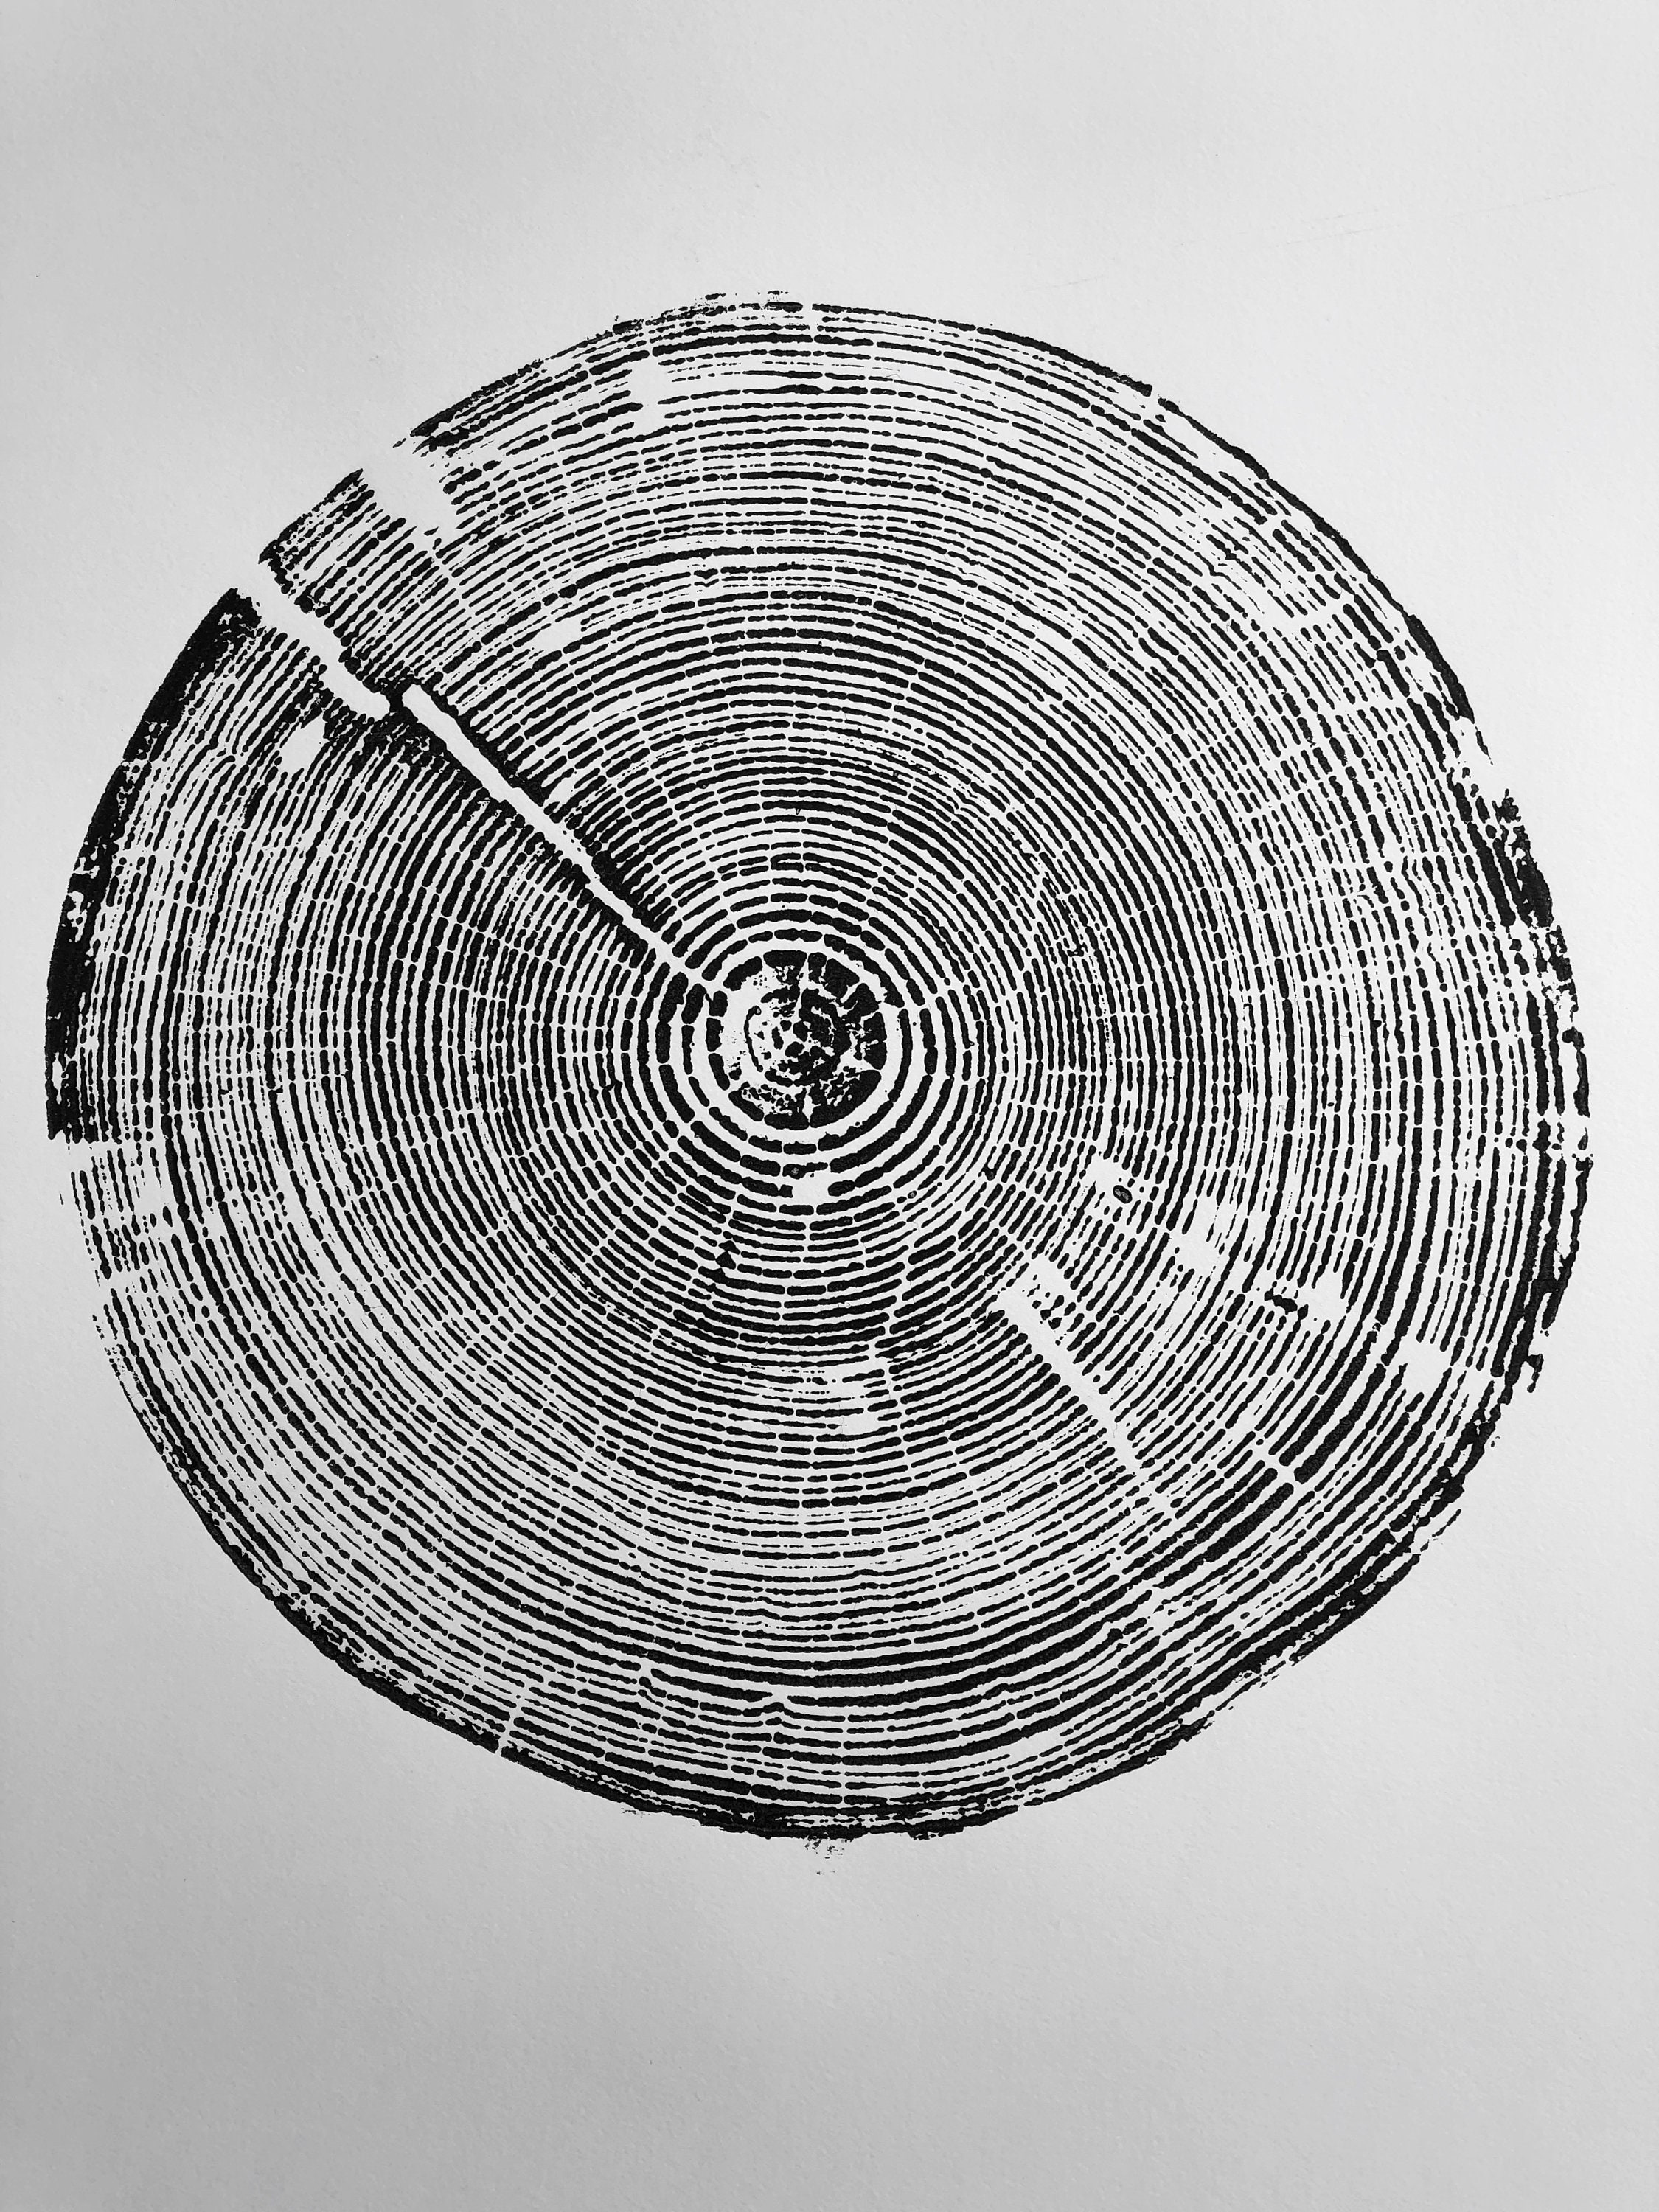 Alabama Tree Ring Print, Alabama art print, made by hand from a real ...